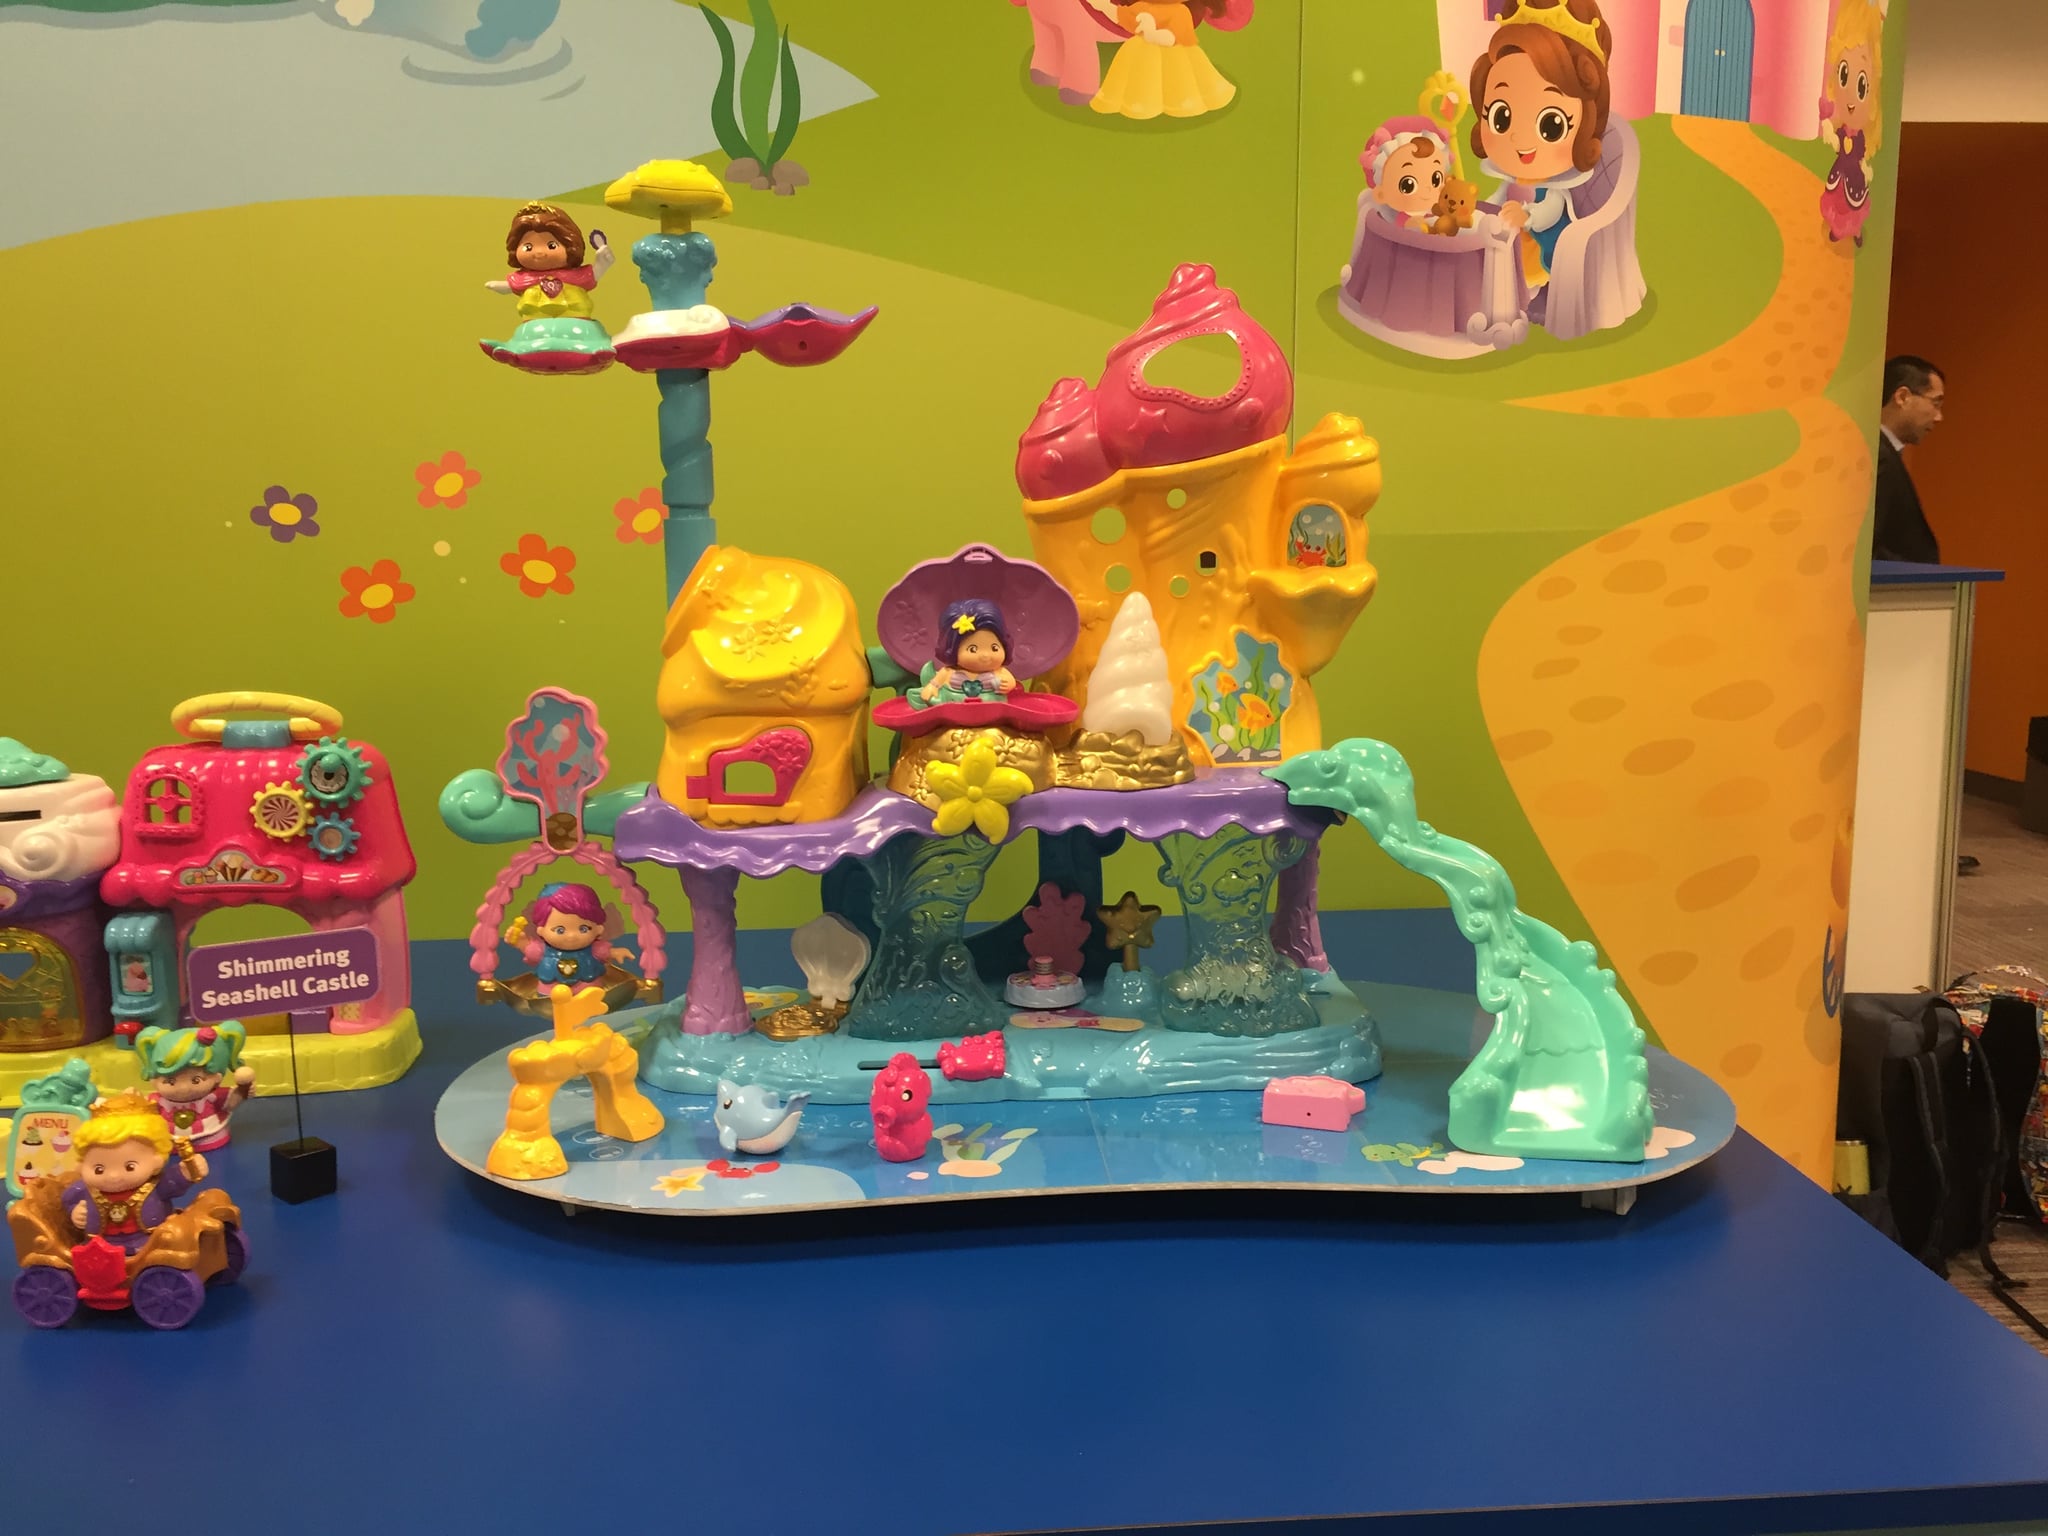 New Toys From Toy Fair 2017 | POPSUGAR Family